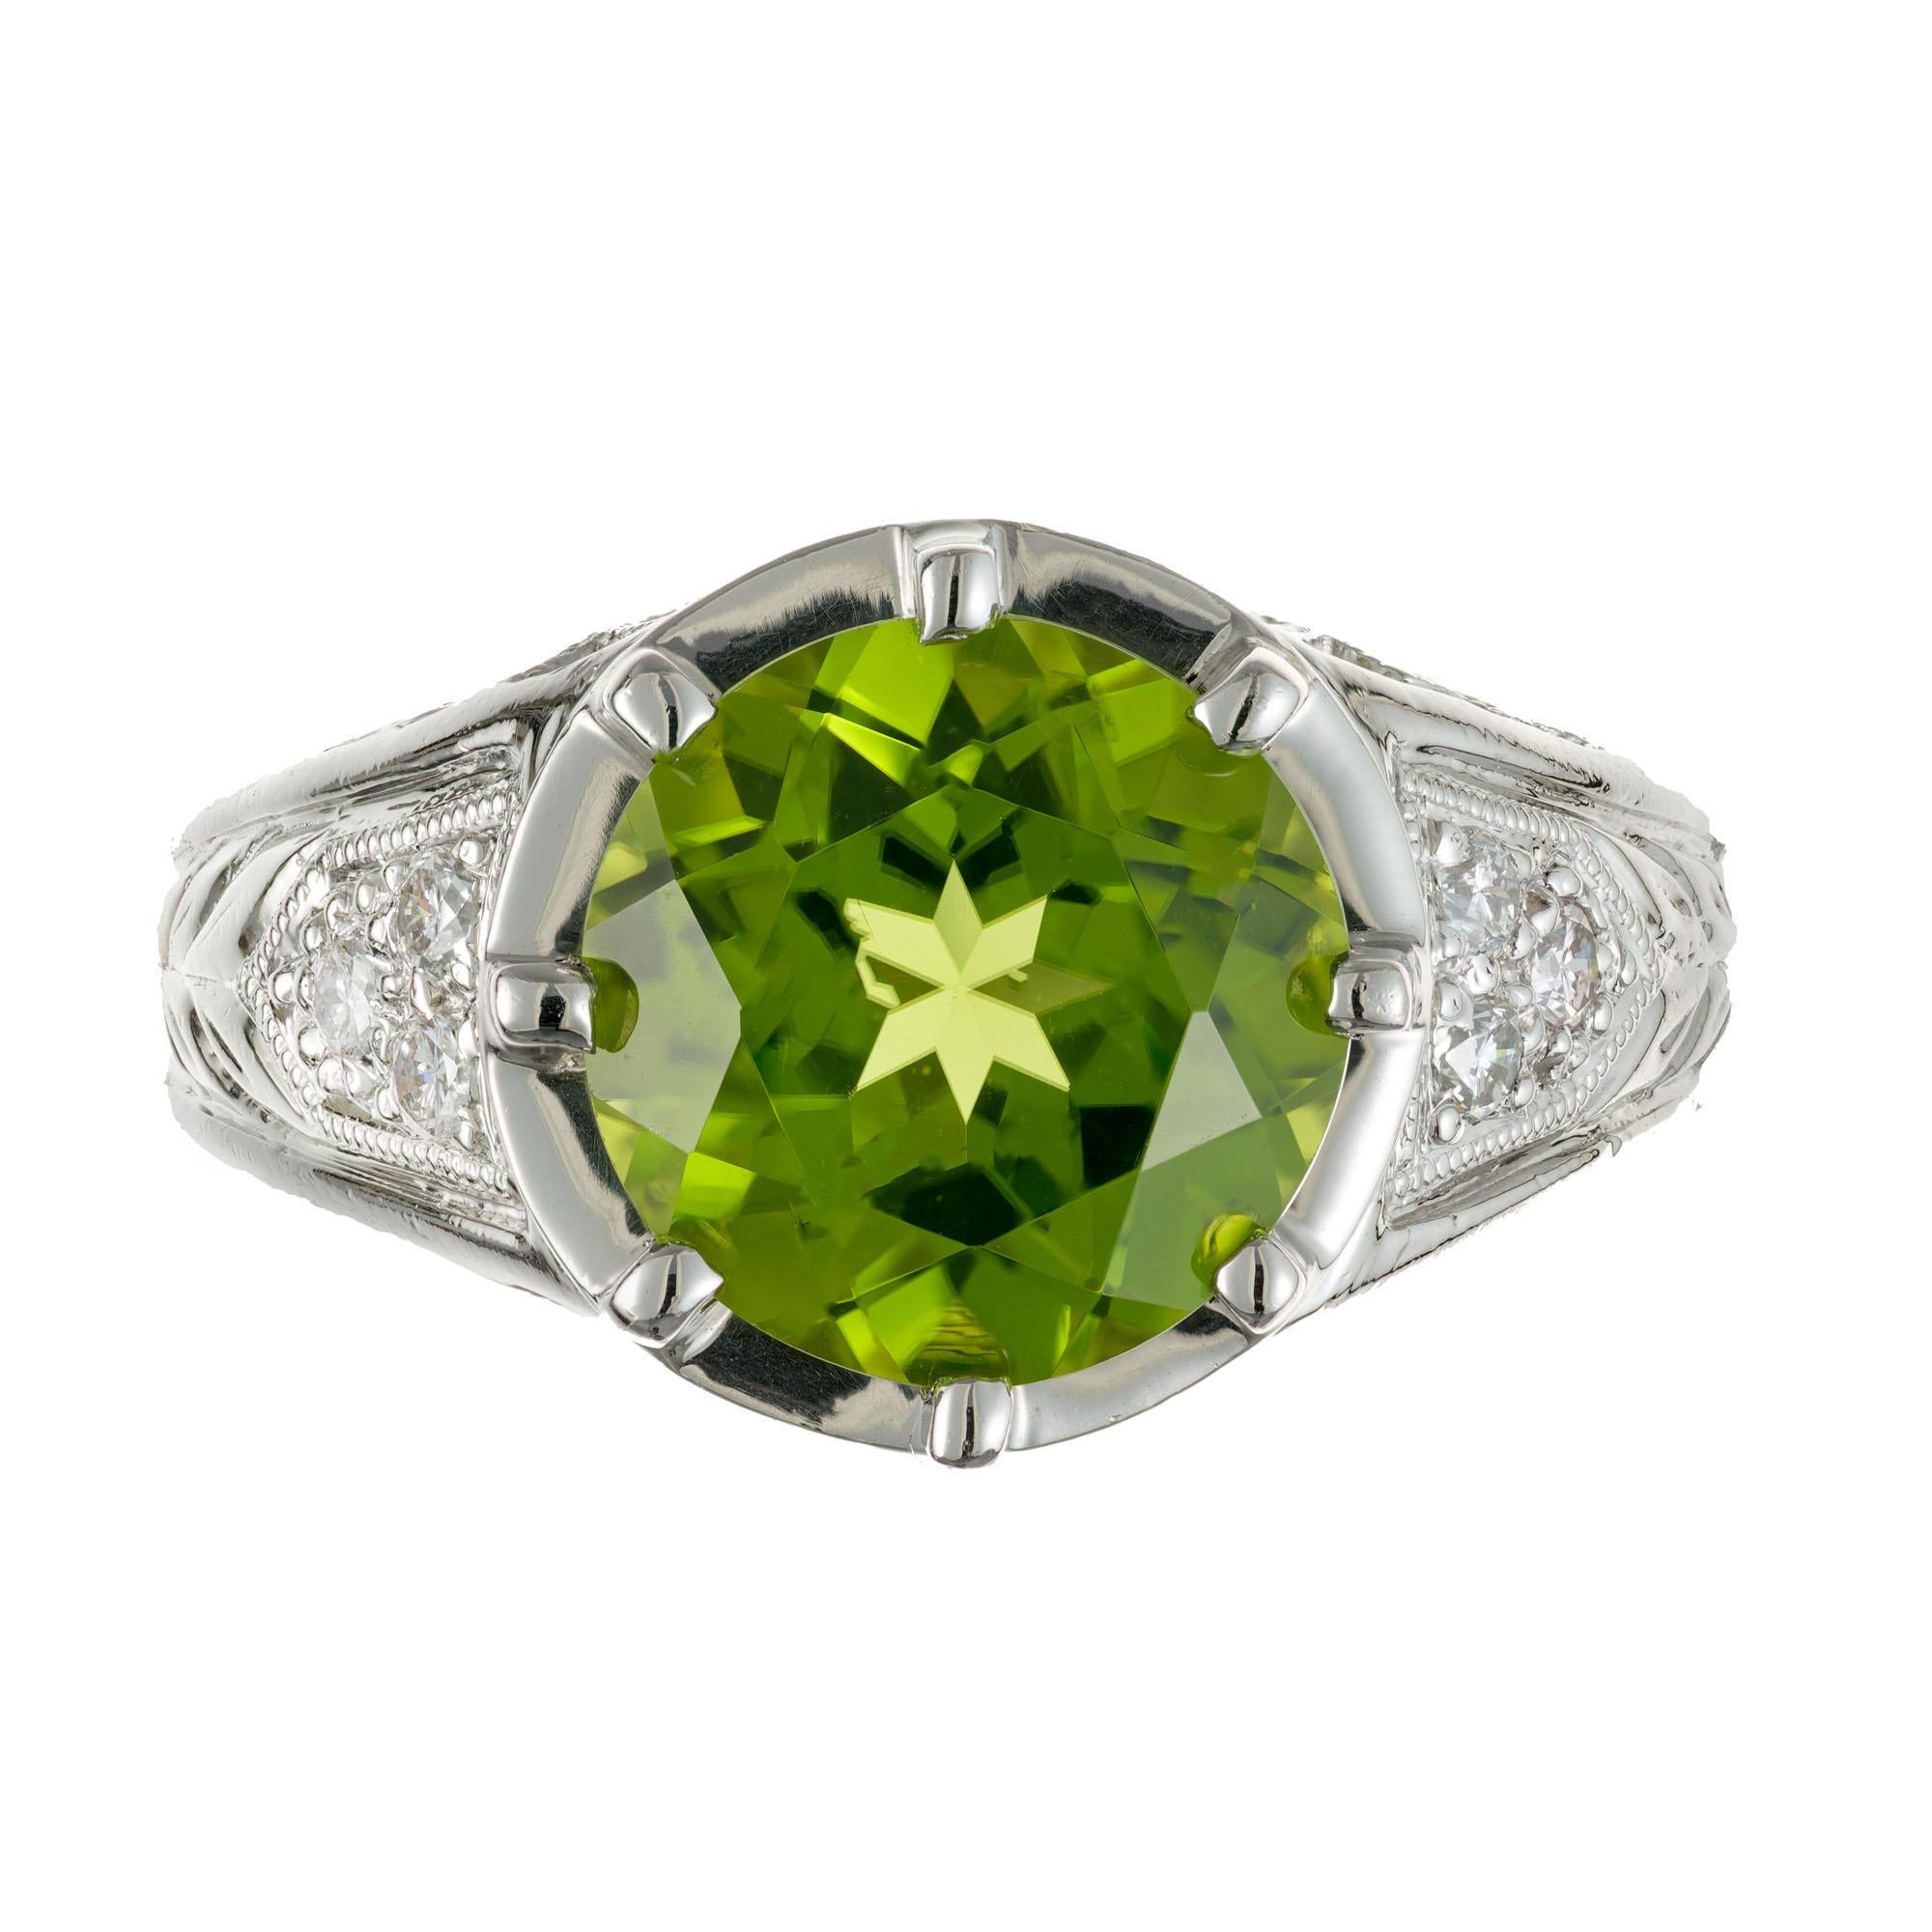 Peridot and diamond ring. 4.25ct European cut peridot center stone in a platinum setting with 14 round accent diamonds. circa 1940's.

1 round bright green gem Peridot, approx. total weight 4.25cts, VS, 10mm
14 round diamonds, approx. total weight